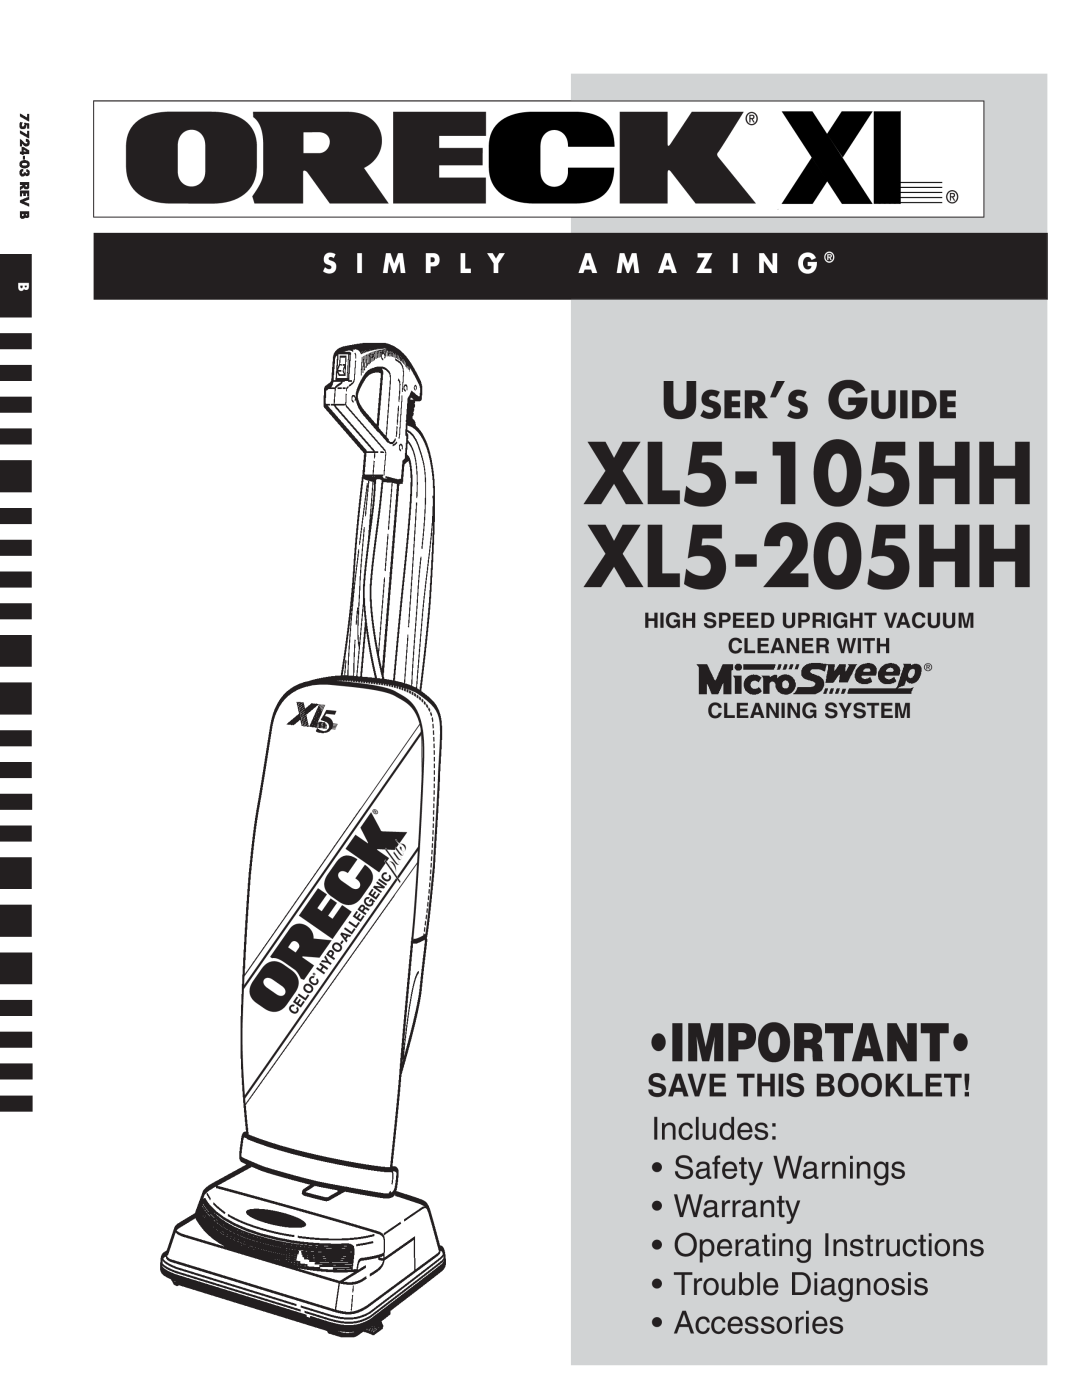 Oreck warranty High Speed Upright Vacuum Cleaner With, Cleaning System, XL5-105HH XL5-205HH, User’S Guide, Accessories 